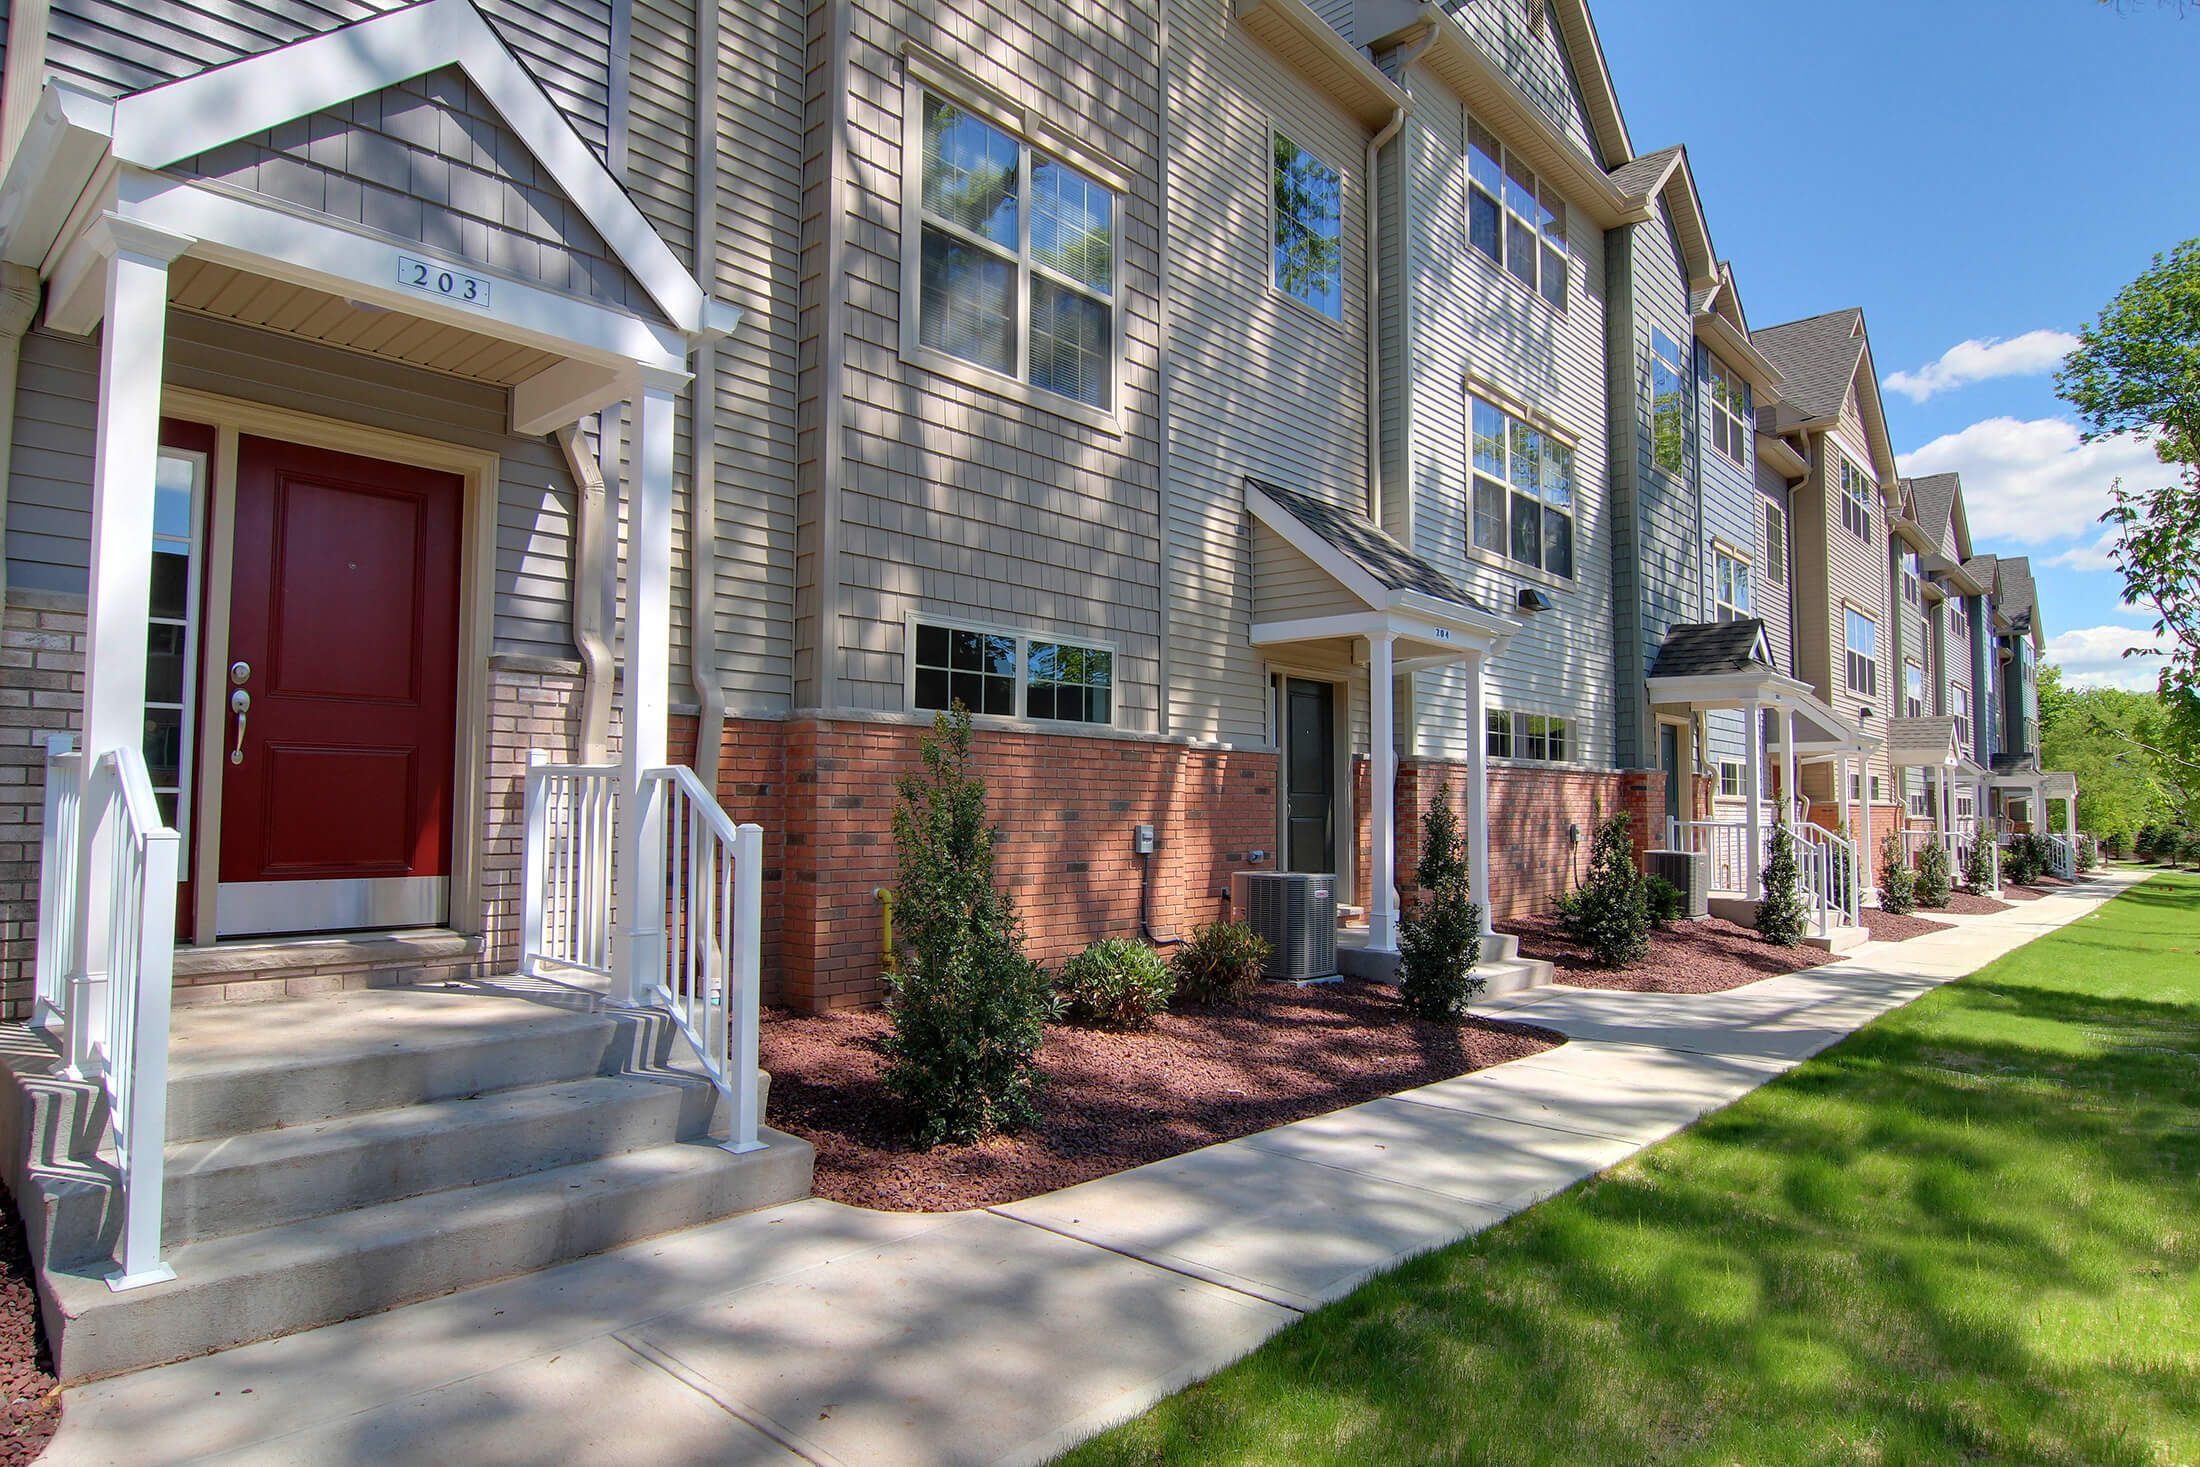 The Landmark Difference - Townhomes